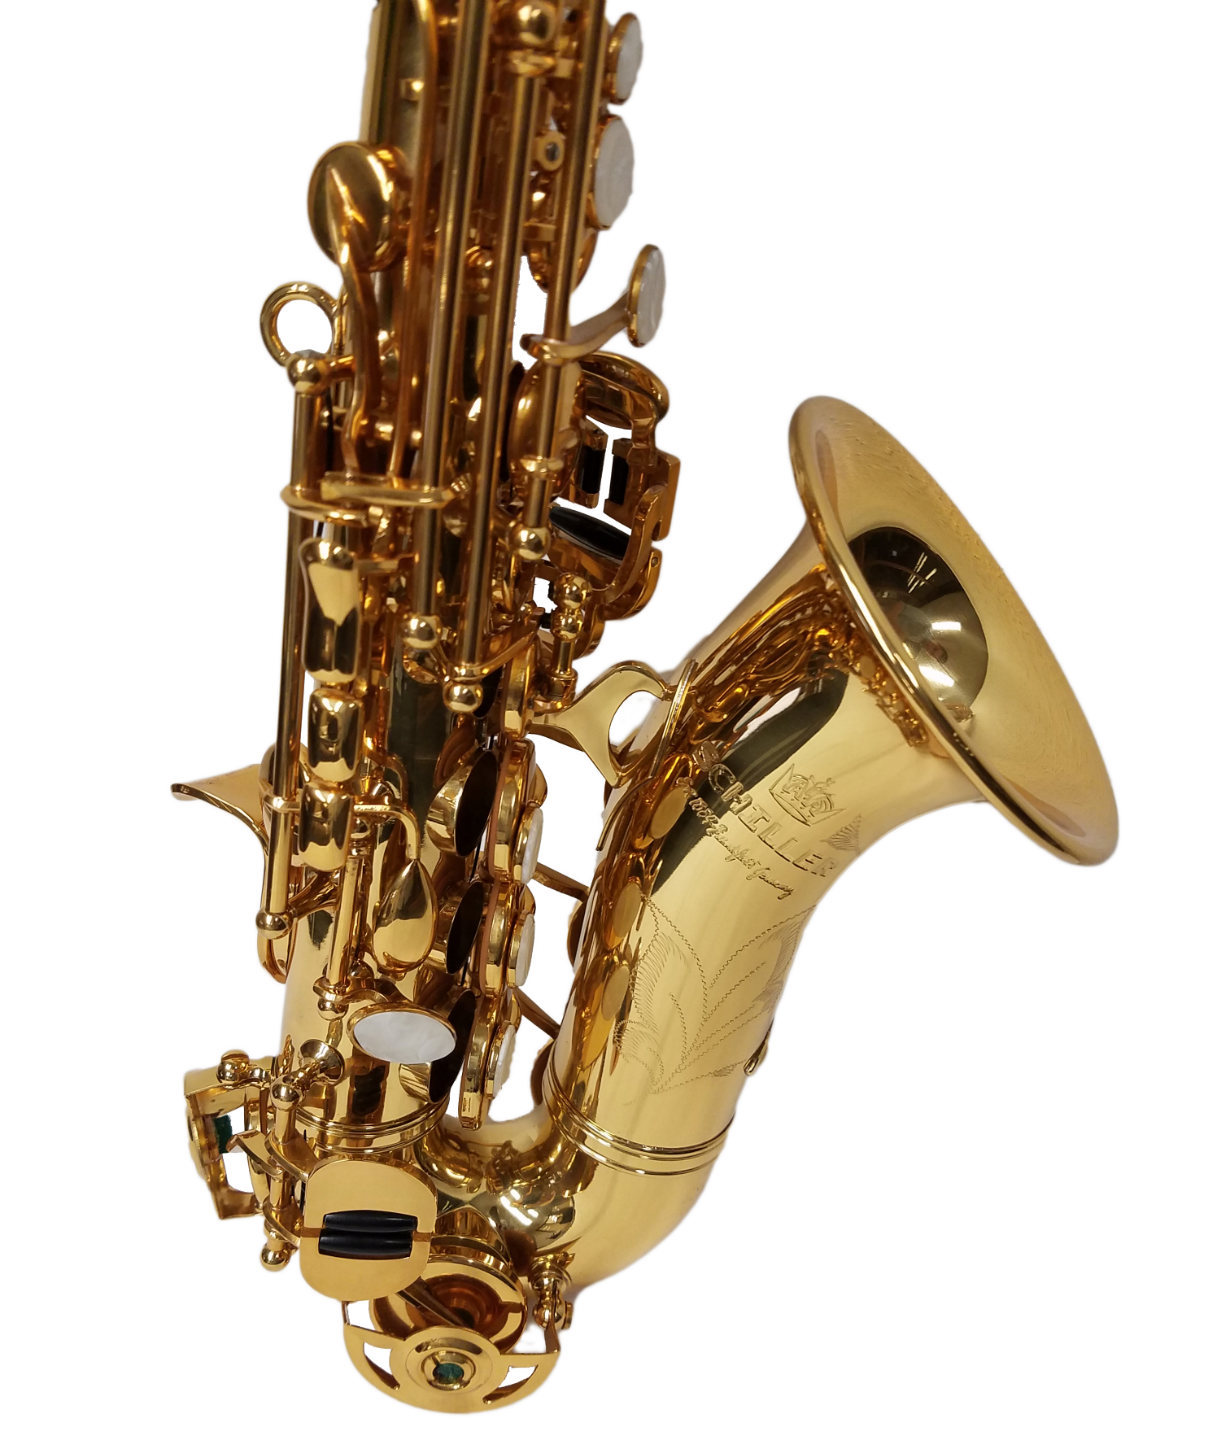 American Heritage 400 Curved Soprano Saxophone – Gold